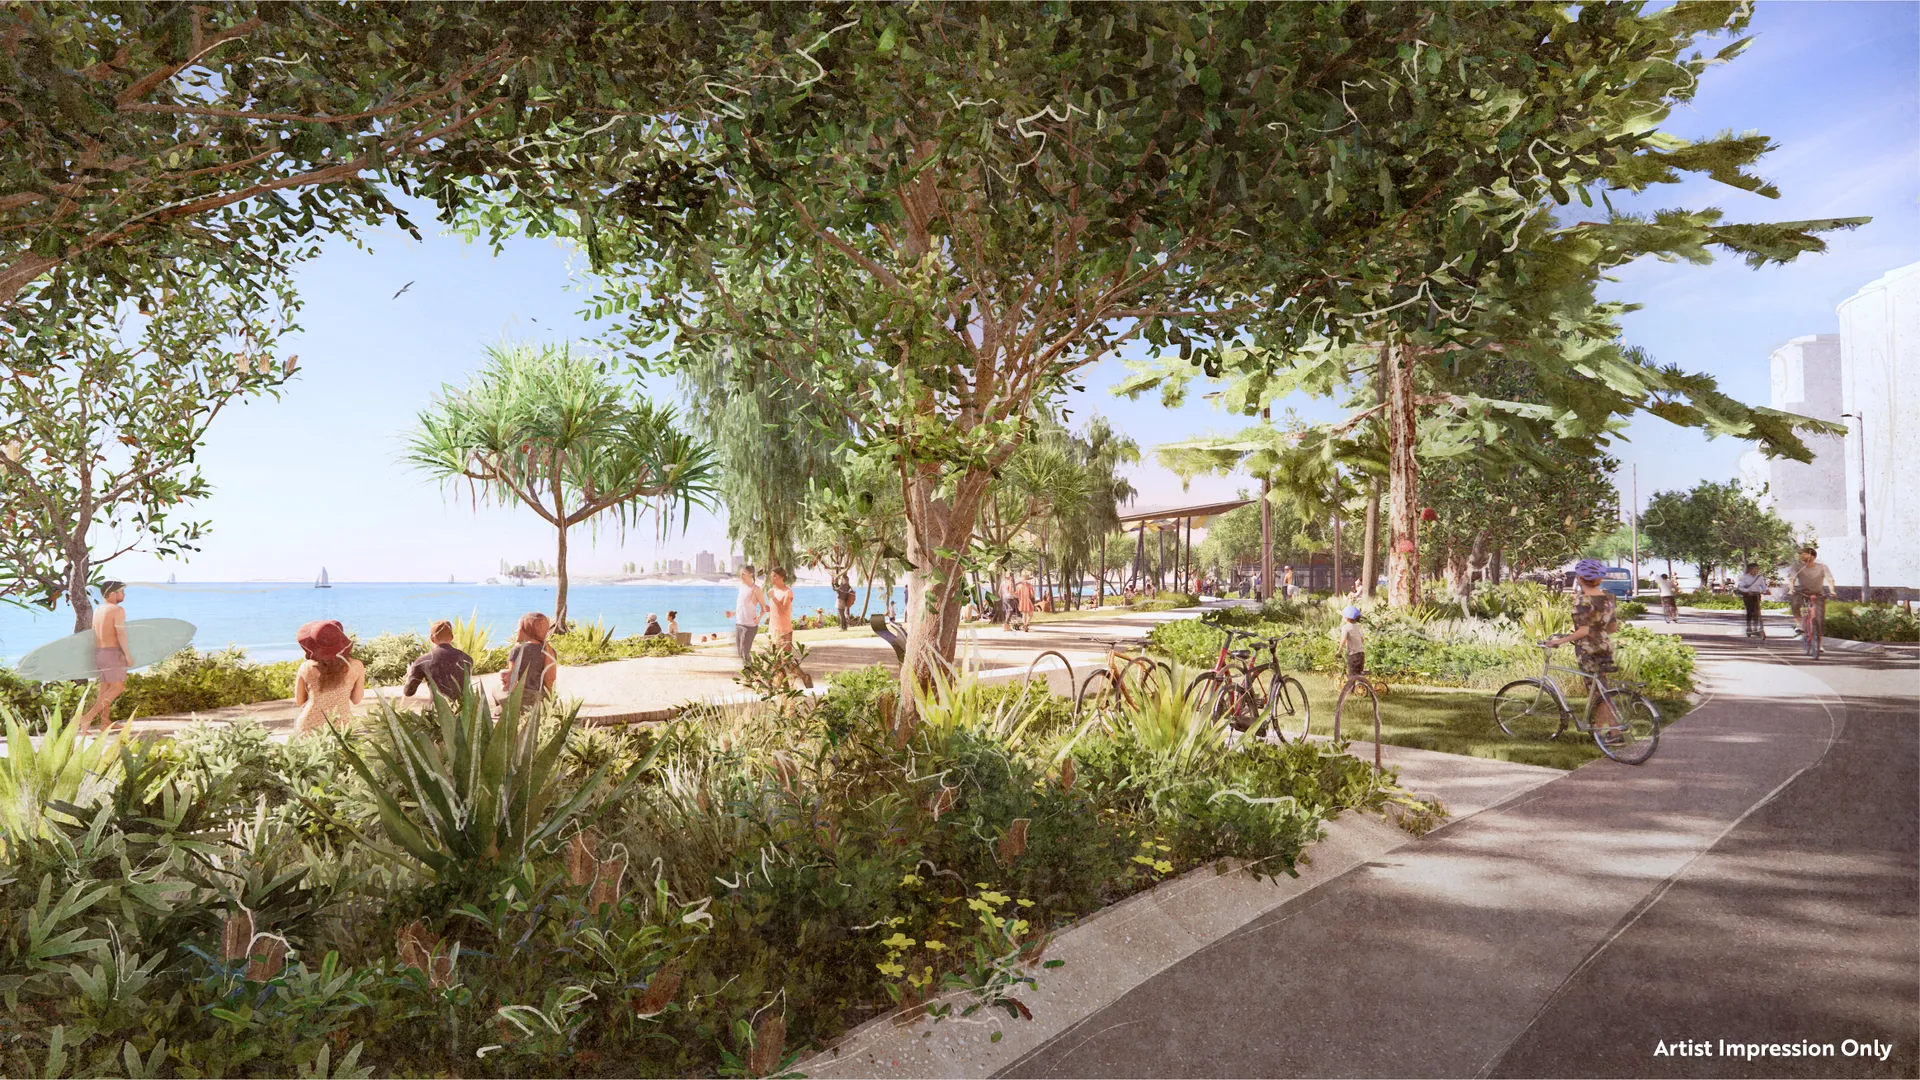 Graphical representation of design of the Central Meeting Place with increased beachfront parkland and new wider pathways to allow for improved connectivity along the foreshore.